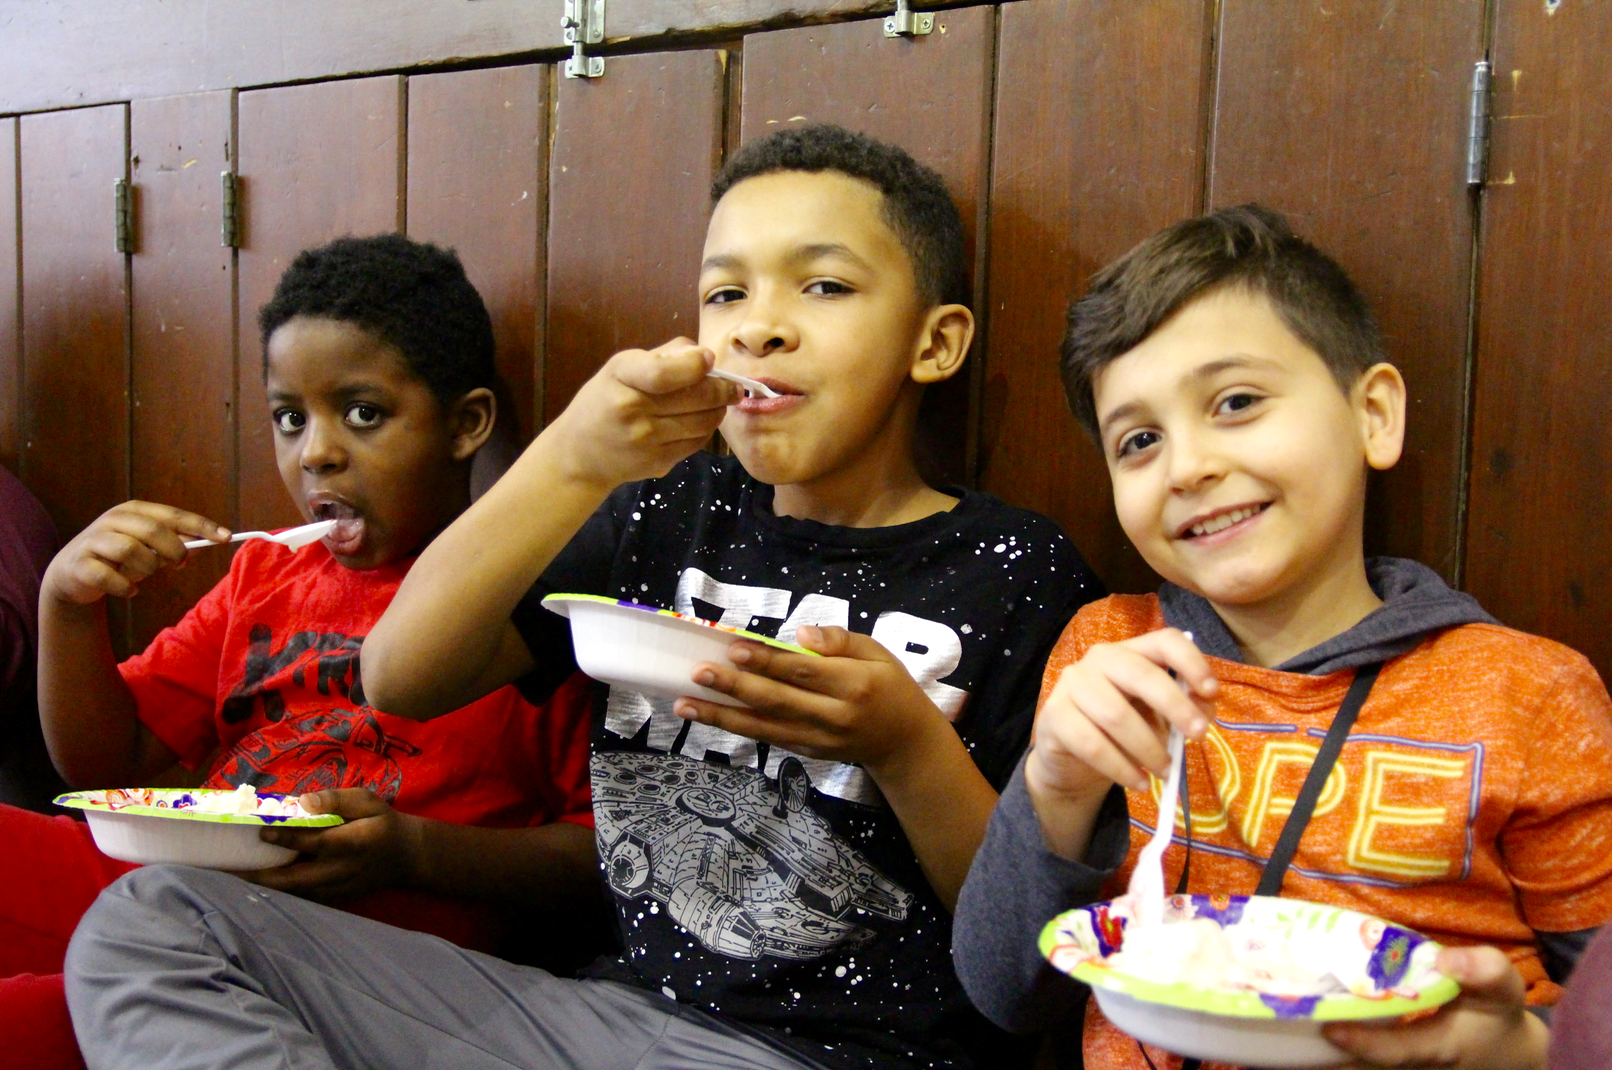 Enjoying the 10th annual ice cream social at the Boys & Girls Club, which coincided with Valentine's Day. Feb 14, 2018 Photo: Leslie Yager